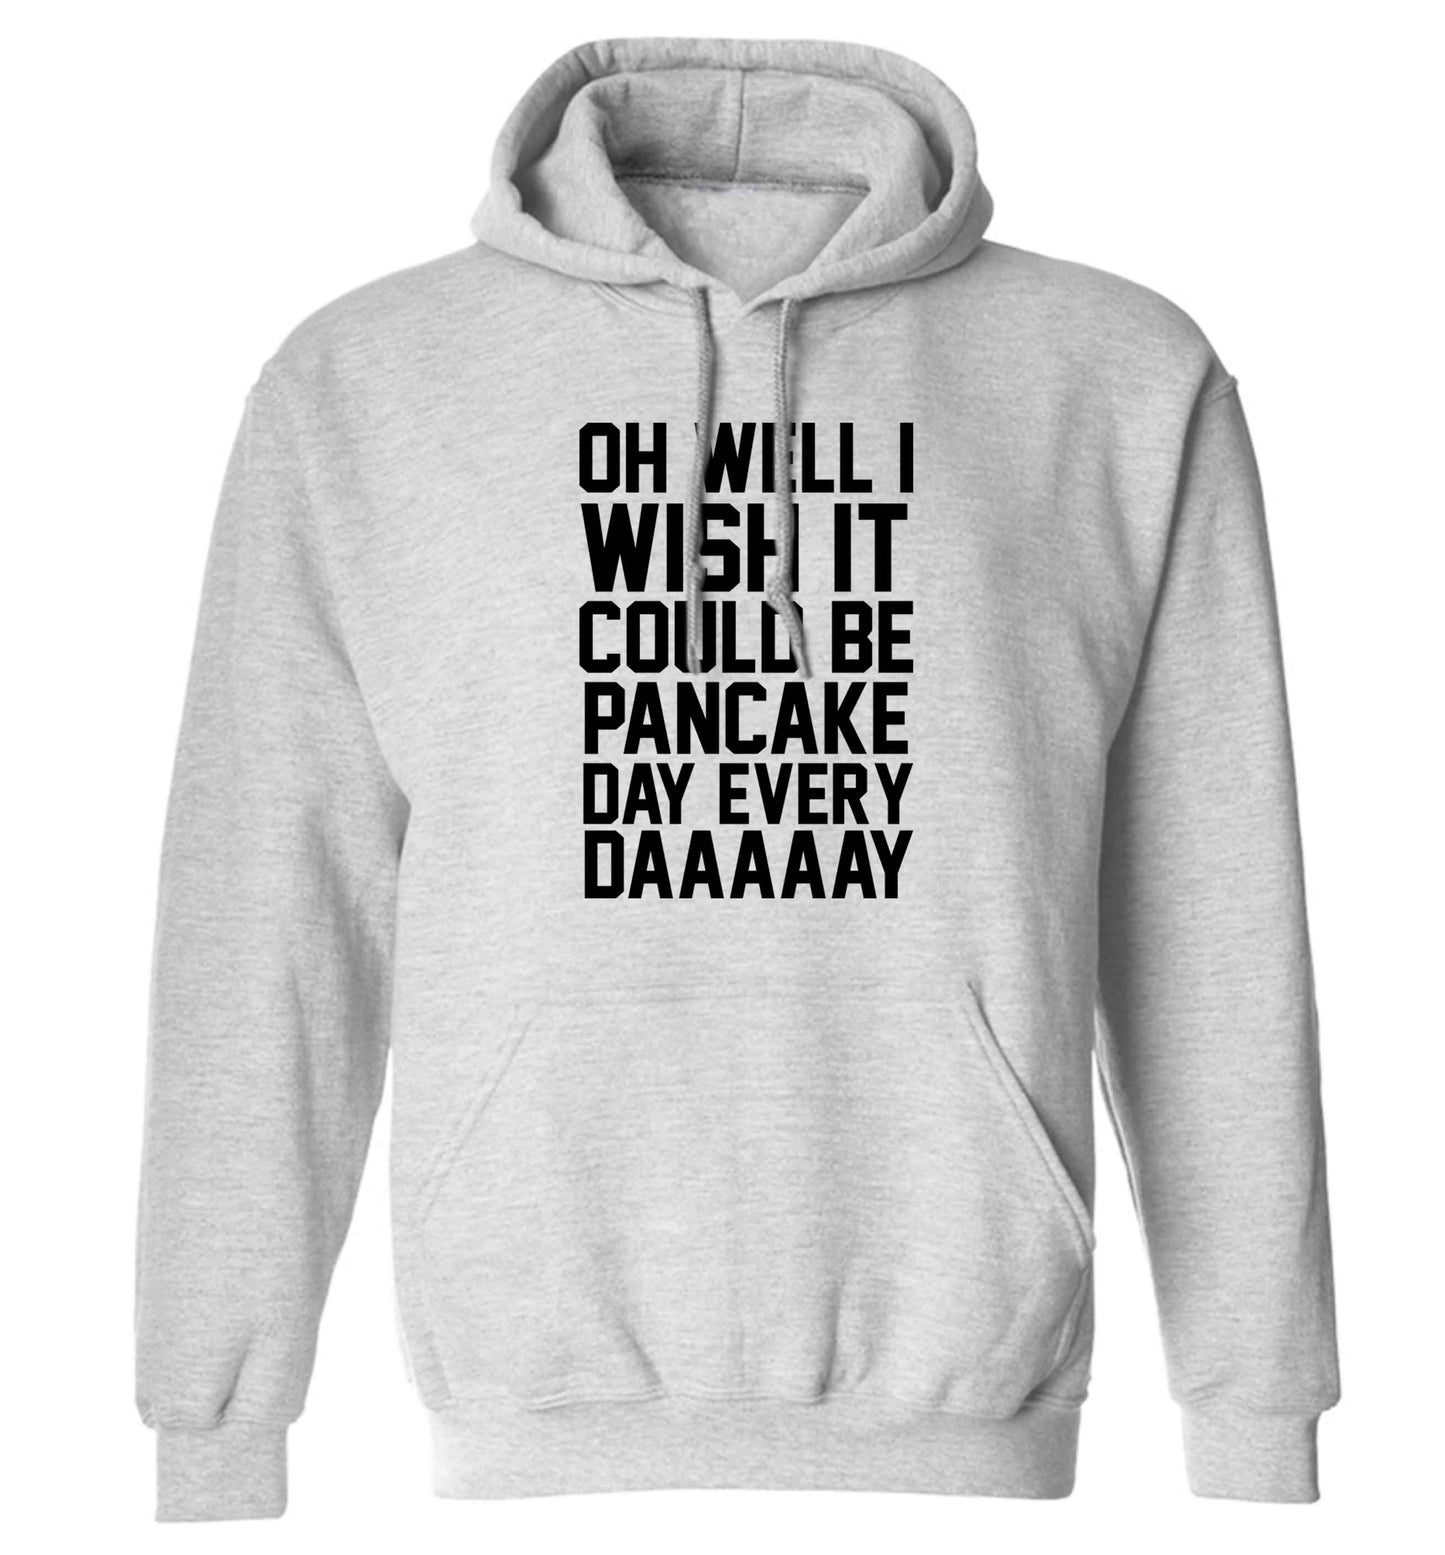 Oh well I wish it could be pancake day every day adults unisex grey hoodie 2XL